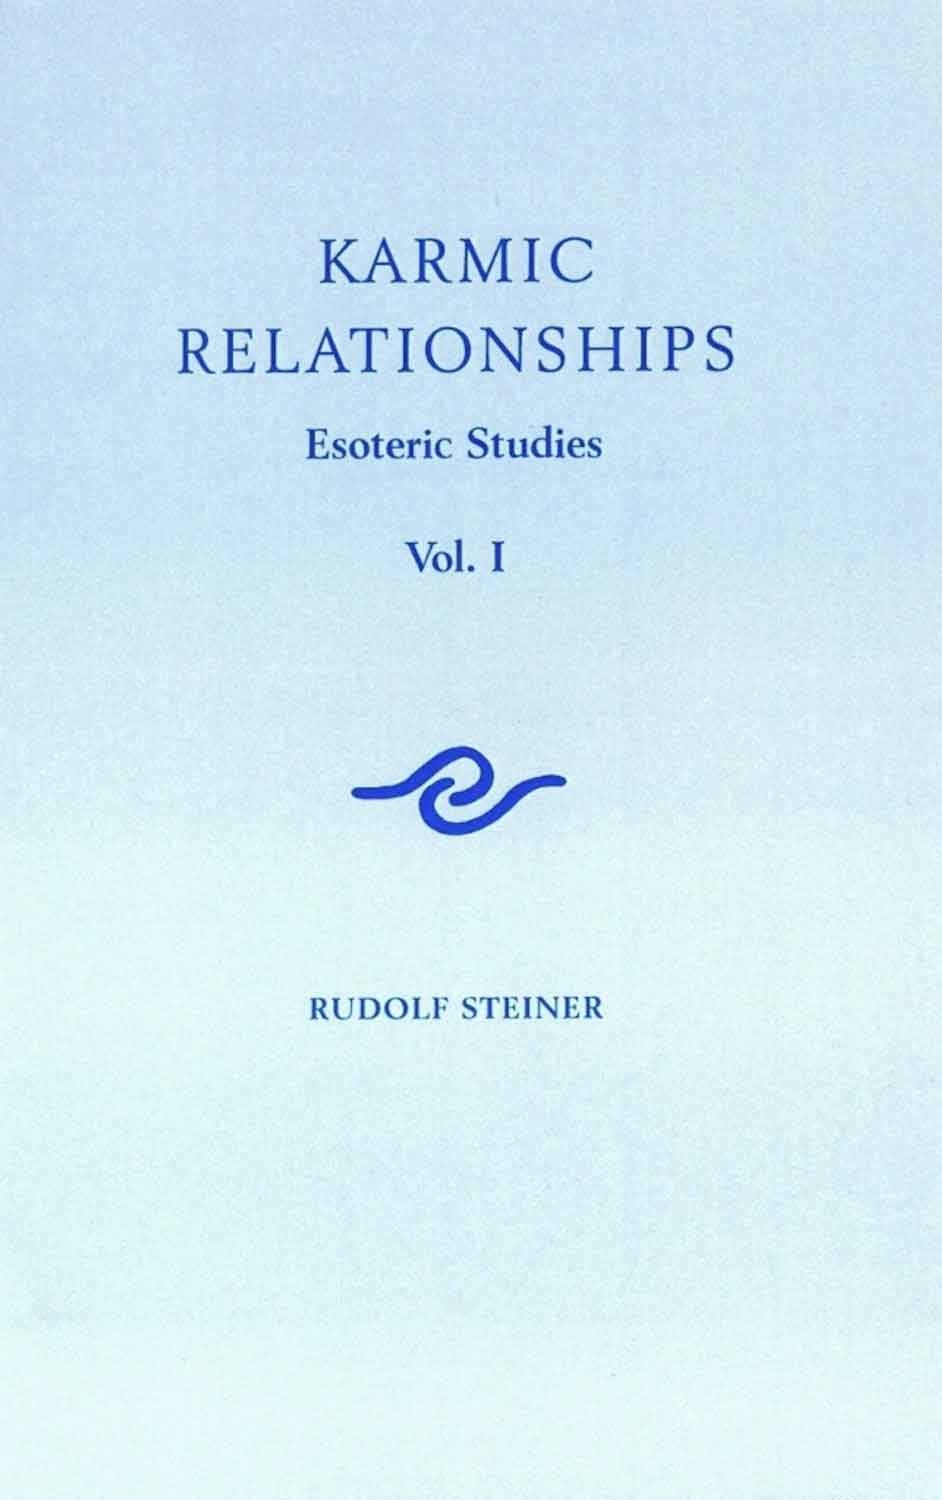 Episode 58: Lecture 58: Karmic Relationships given on July 19 1924 by Rudolf Steiner